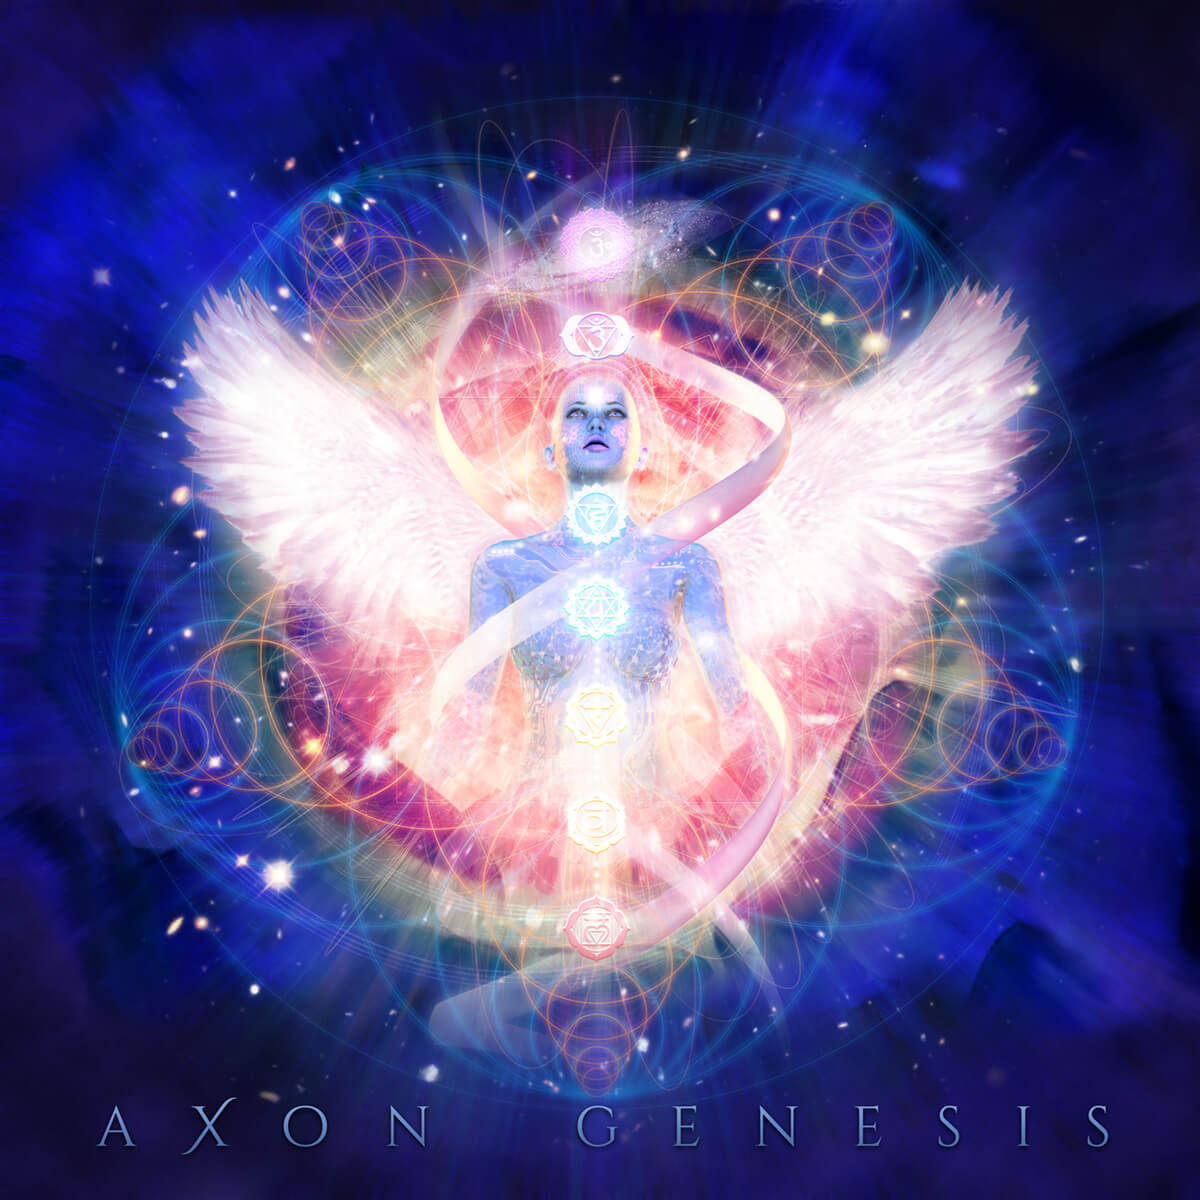 Emergence Music and Cover Art by Axon Genesis